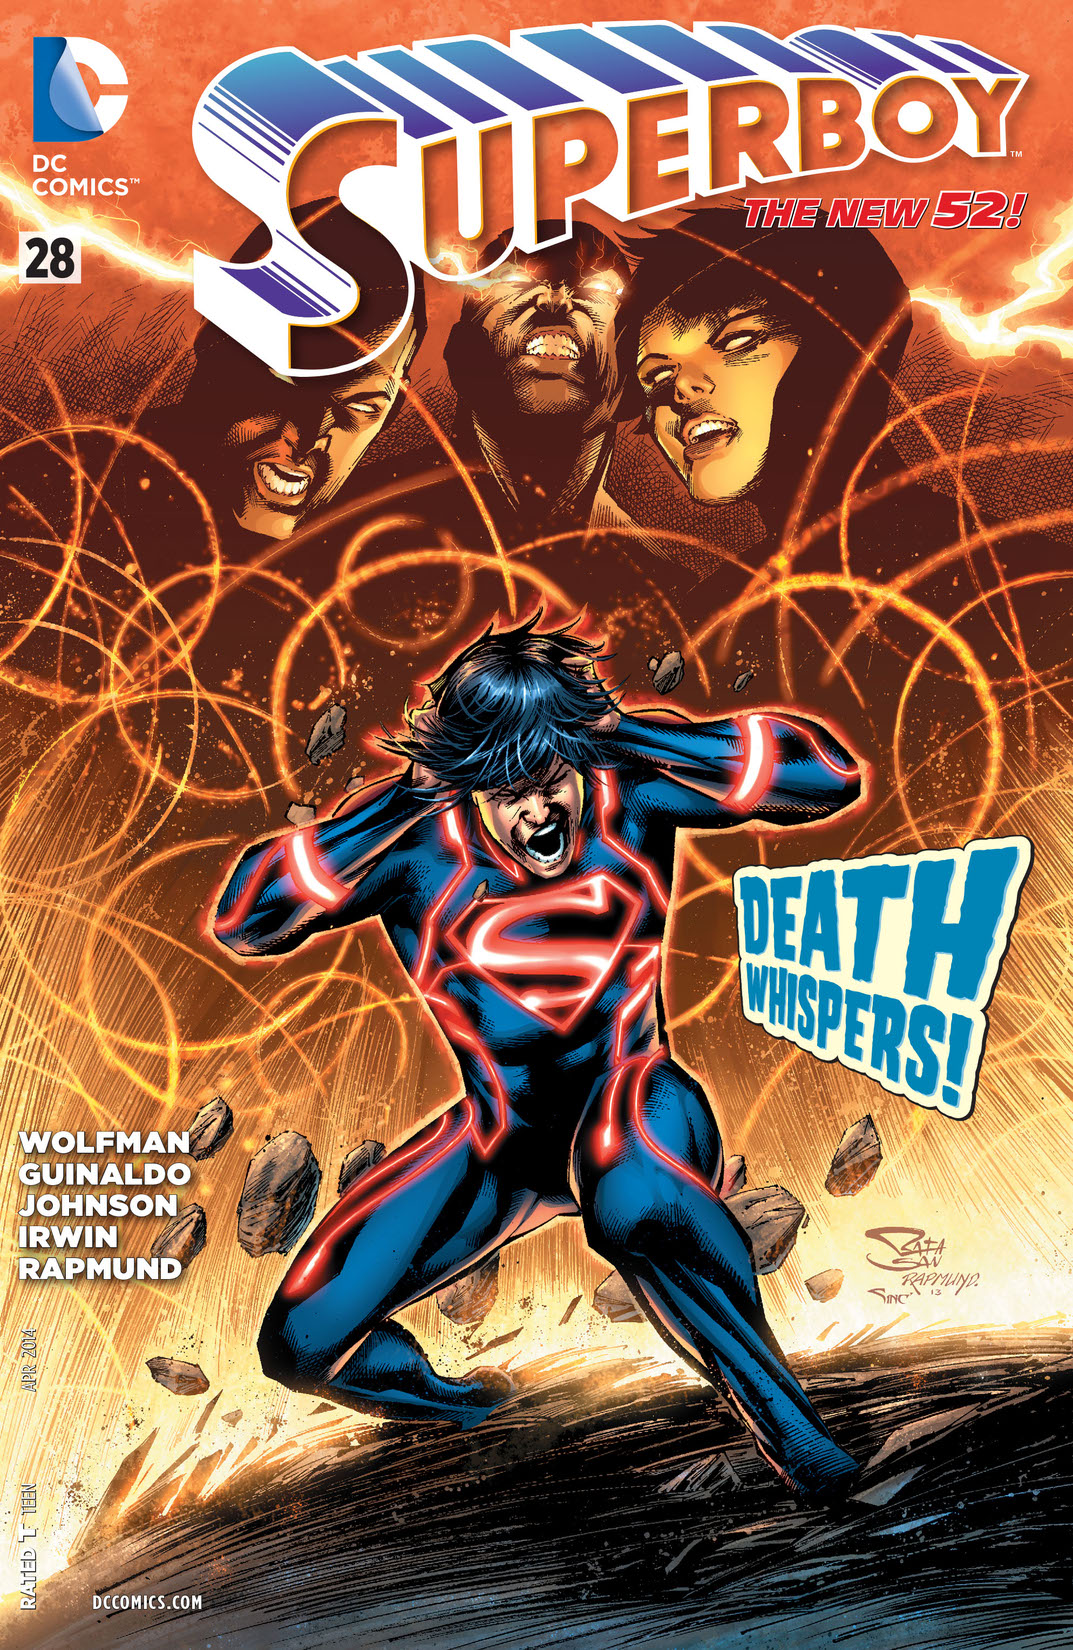 Superboy (2011-) #28 preview images